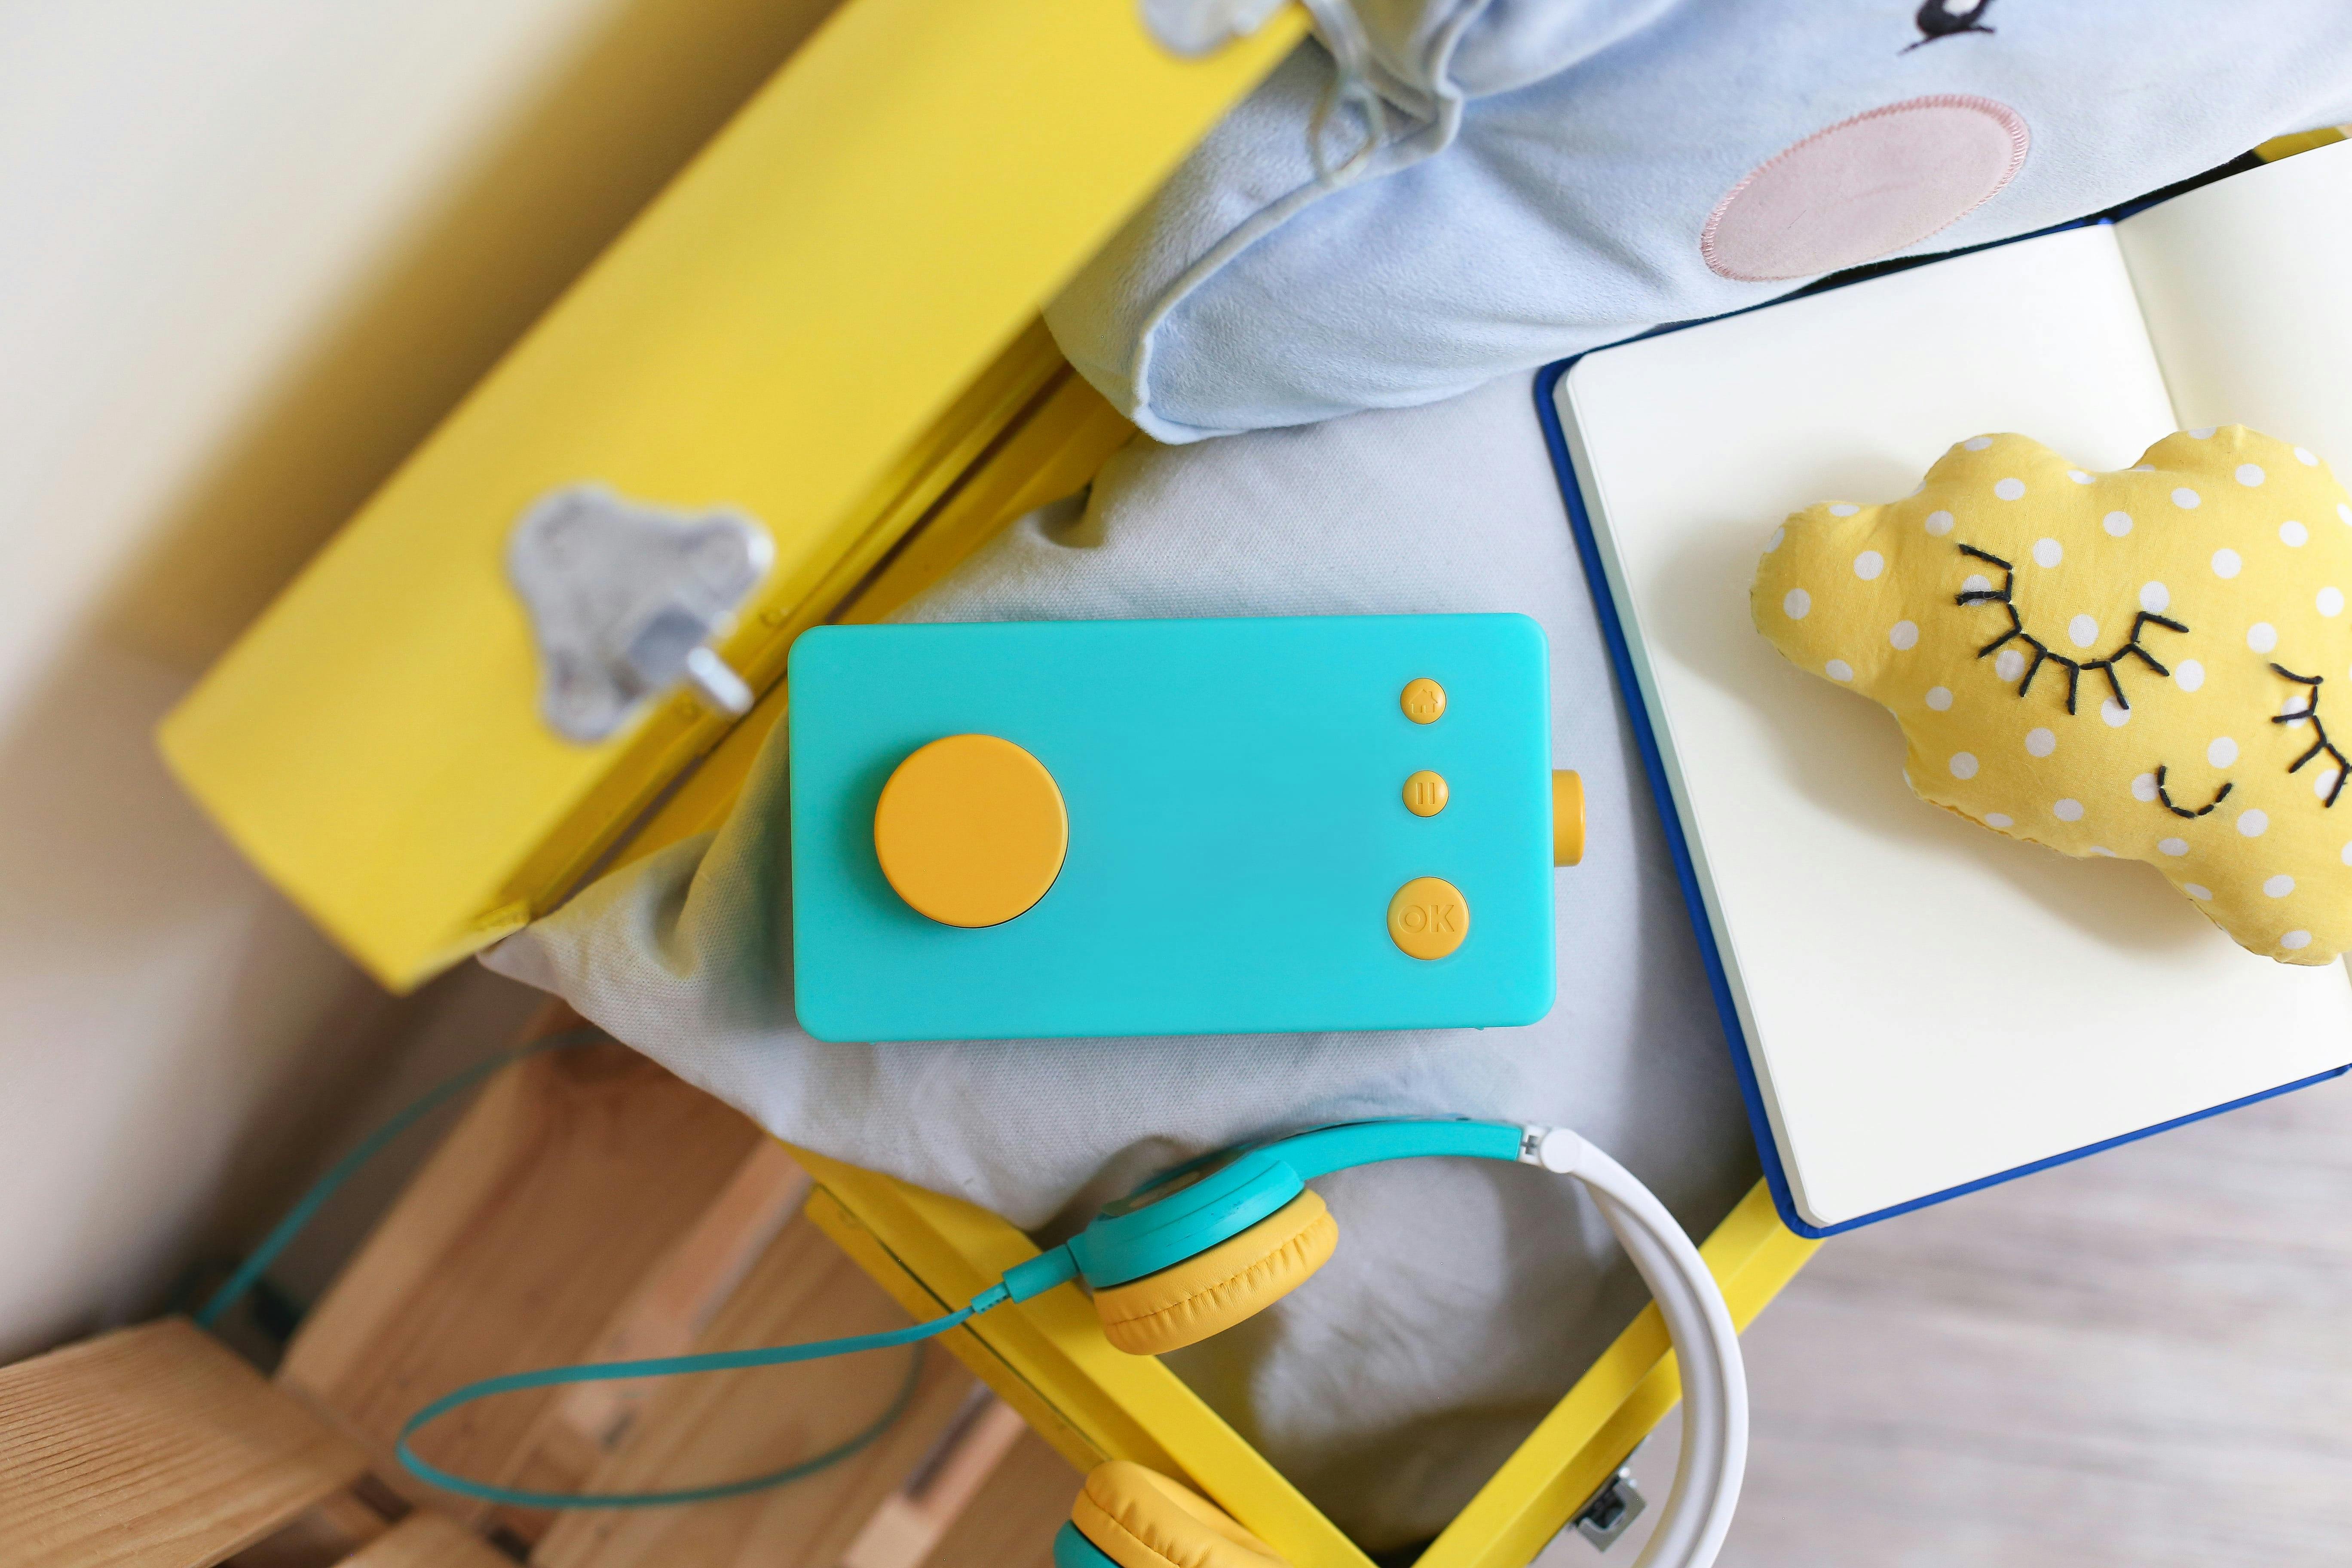 Lunii storytelling toy lets children weave their own tales - Gearbrain